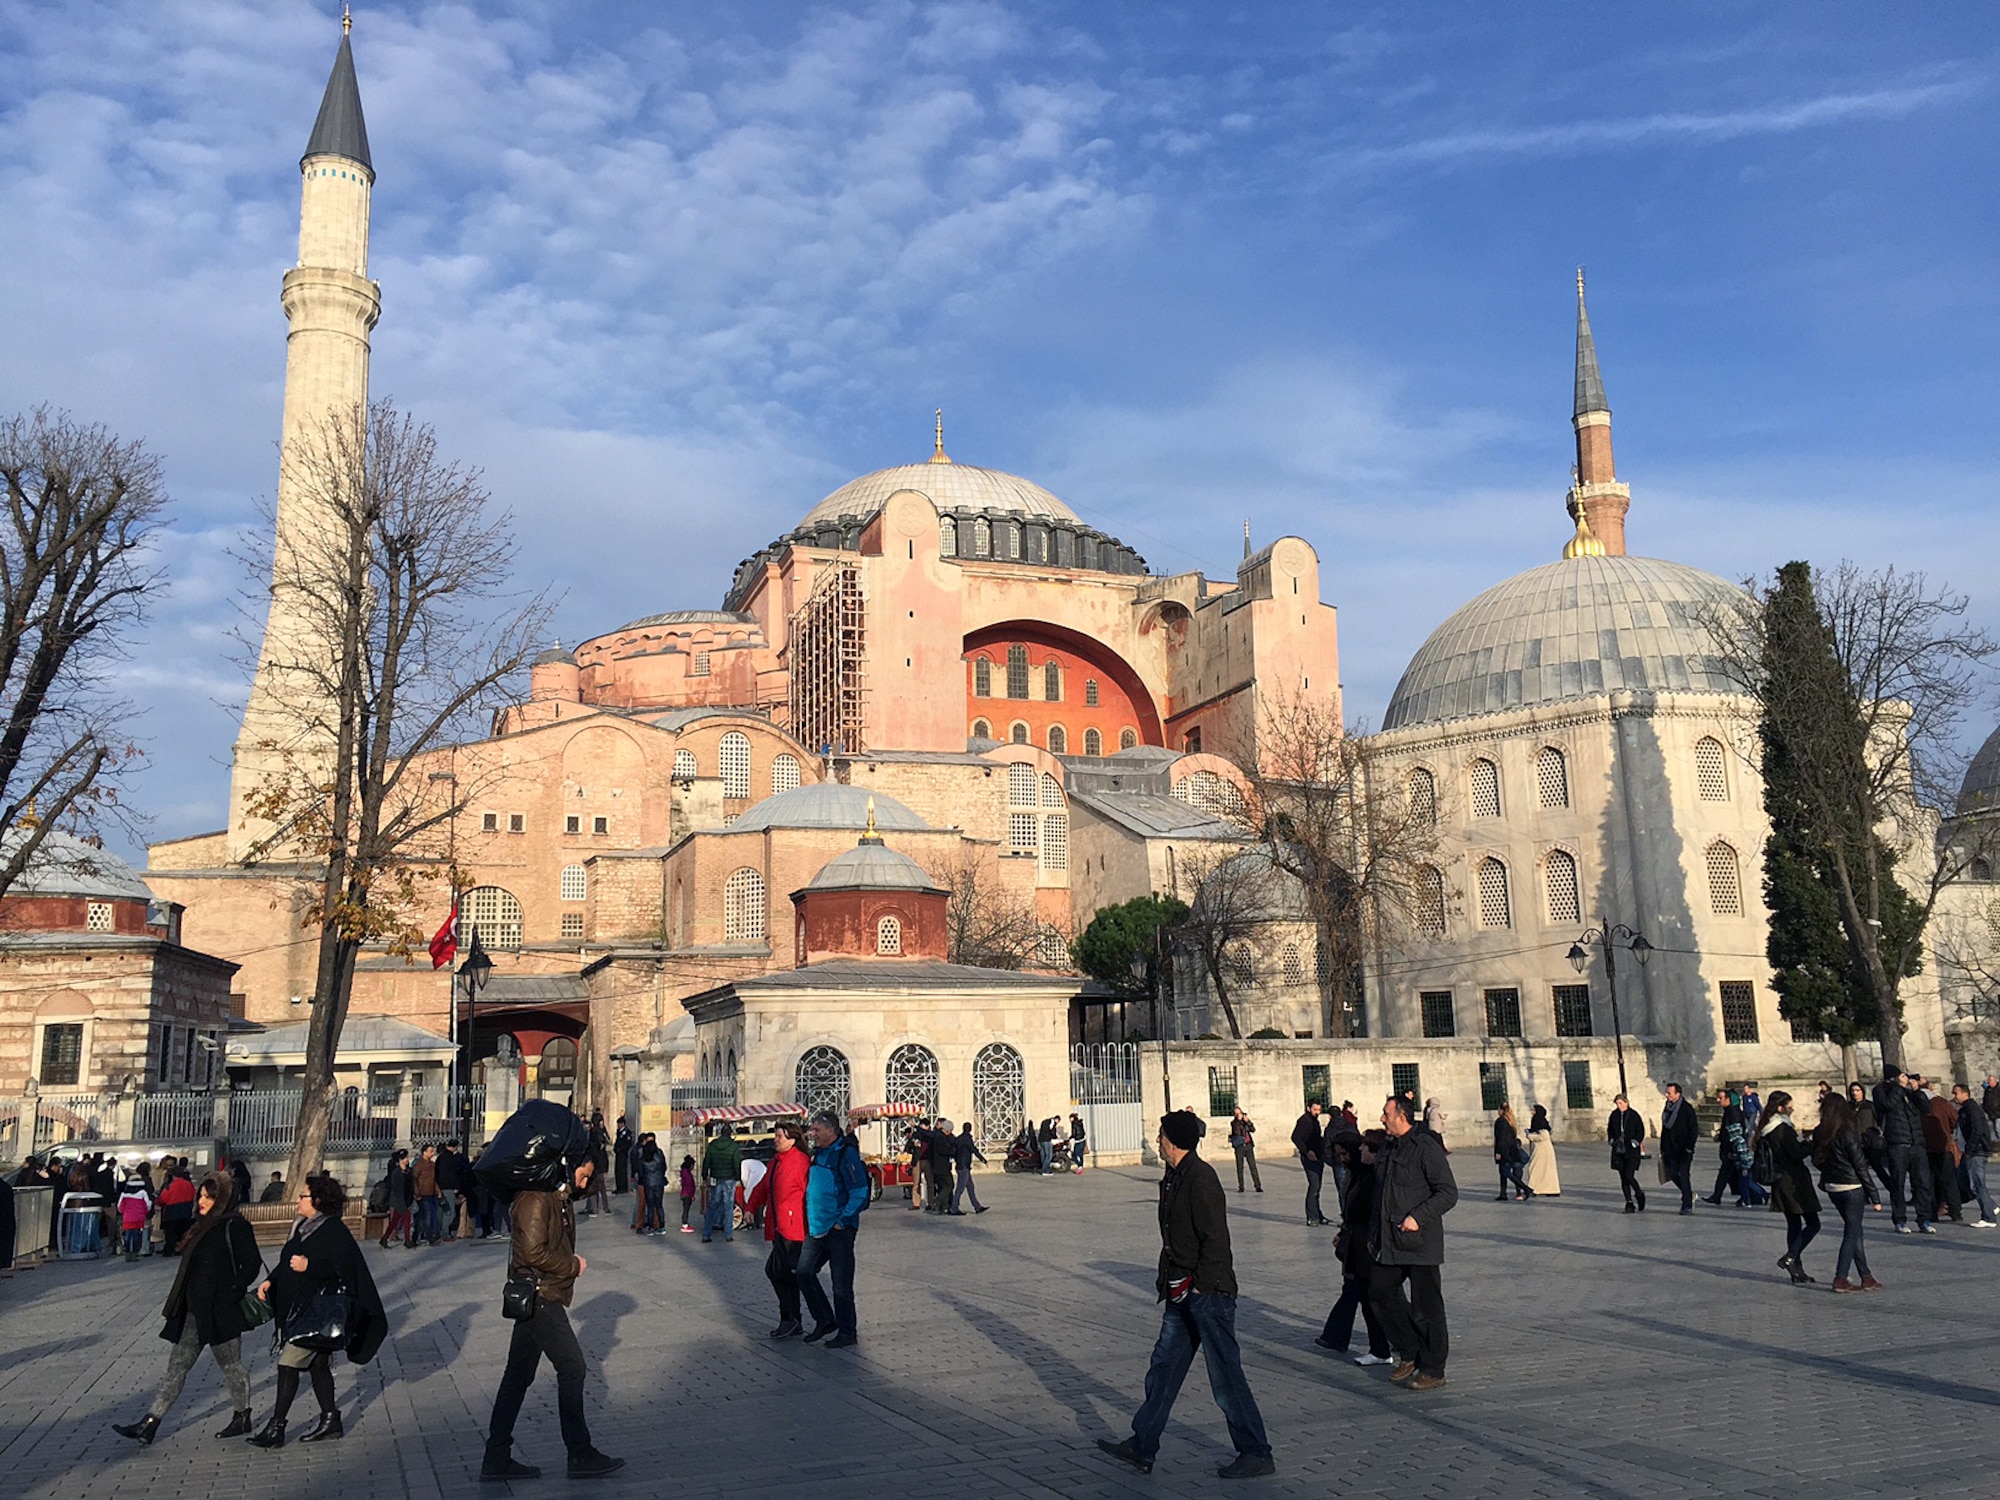 Originally built as a Greek Orthodox patriarchal basilica, the Hagia Sophia is now a museum in the heart of Istanbul. The church contains a large collection of holy relics and is located near the Blue Mosque and Basilica Cistern. (U.S. Air Force photo by Senior Airman Michael Battles/Released)